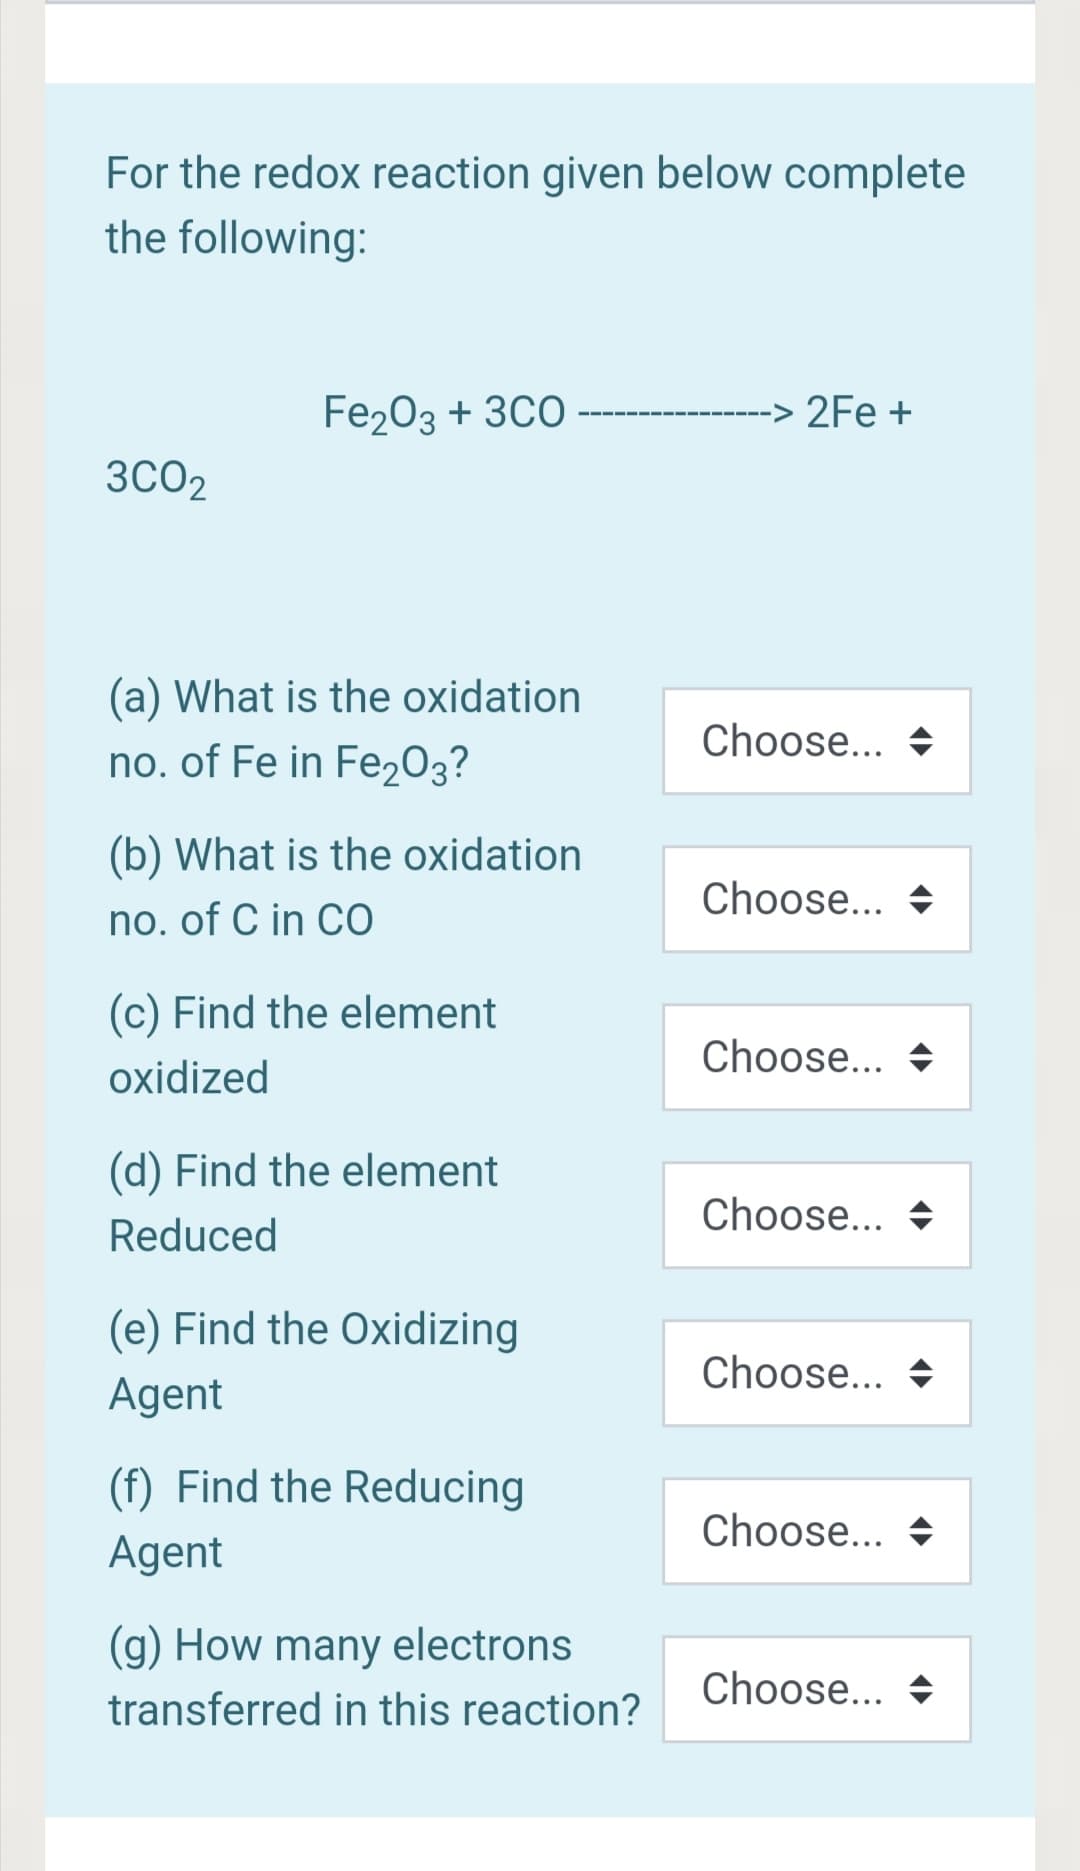 For the redox reaction given below complete
the following:
Fe203 + 3CO-
2Fe +
3CO2
(a) What is the oxidation
Choose... +
no. of Fe in Fe203?
(b) What is the oxidation
Choose... +
no. of C in CO
(c) Find the element
Choose... +
oxidized
(d) Find the element
Choose... +
Reduced
(e) Find the Oxidizing
Choose... +
Agent
(f) Find the Reducing
Choose... +
Agent
(g) How many electrons
Choose... +
transferred in this reaction?
